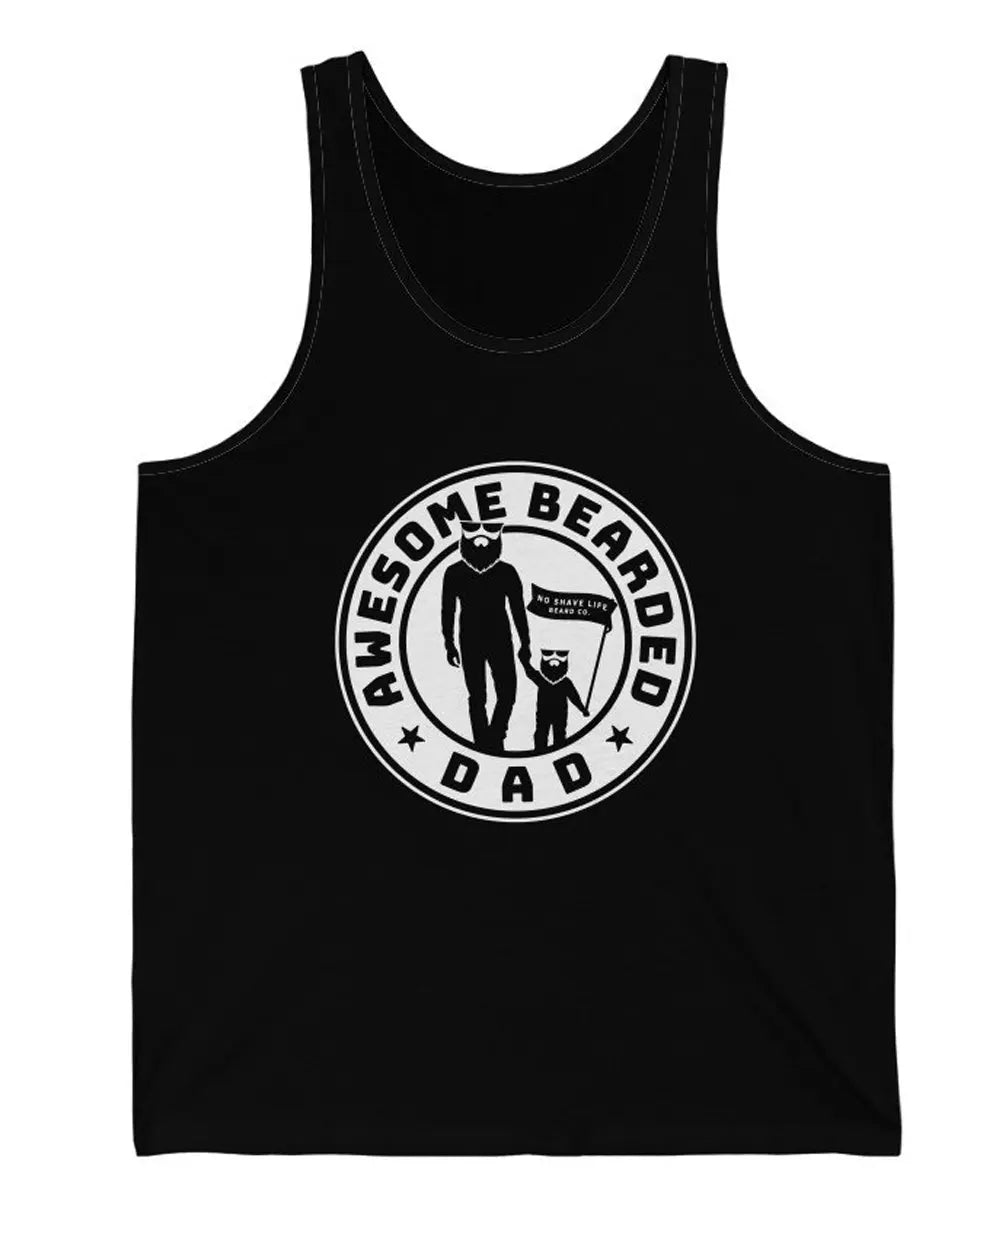 AWESOME BEARDED DAD Black Men's Tank Top